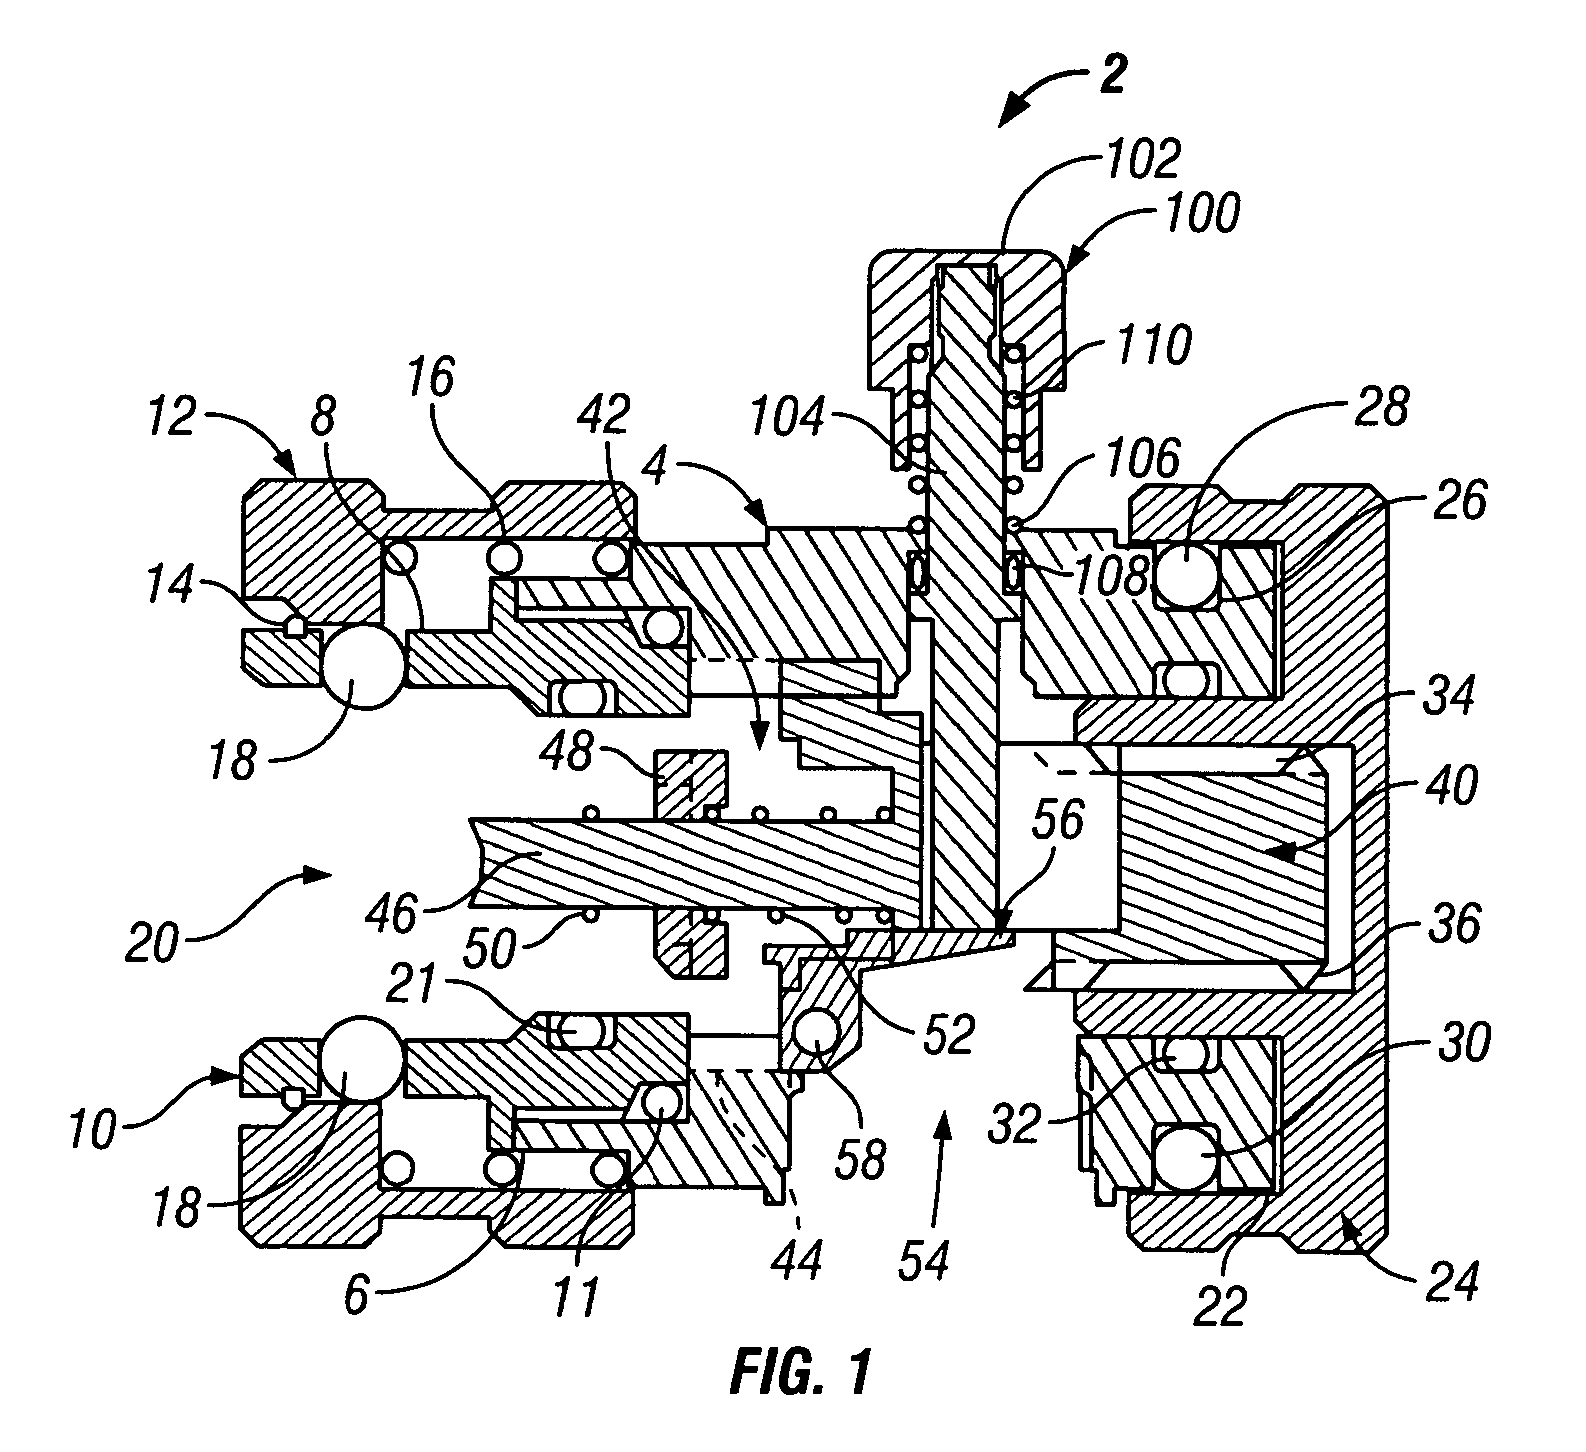 Method and apparatus for servicing a pressurized system